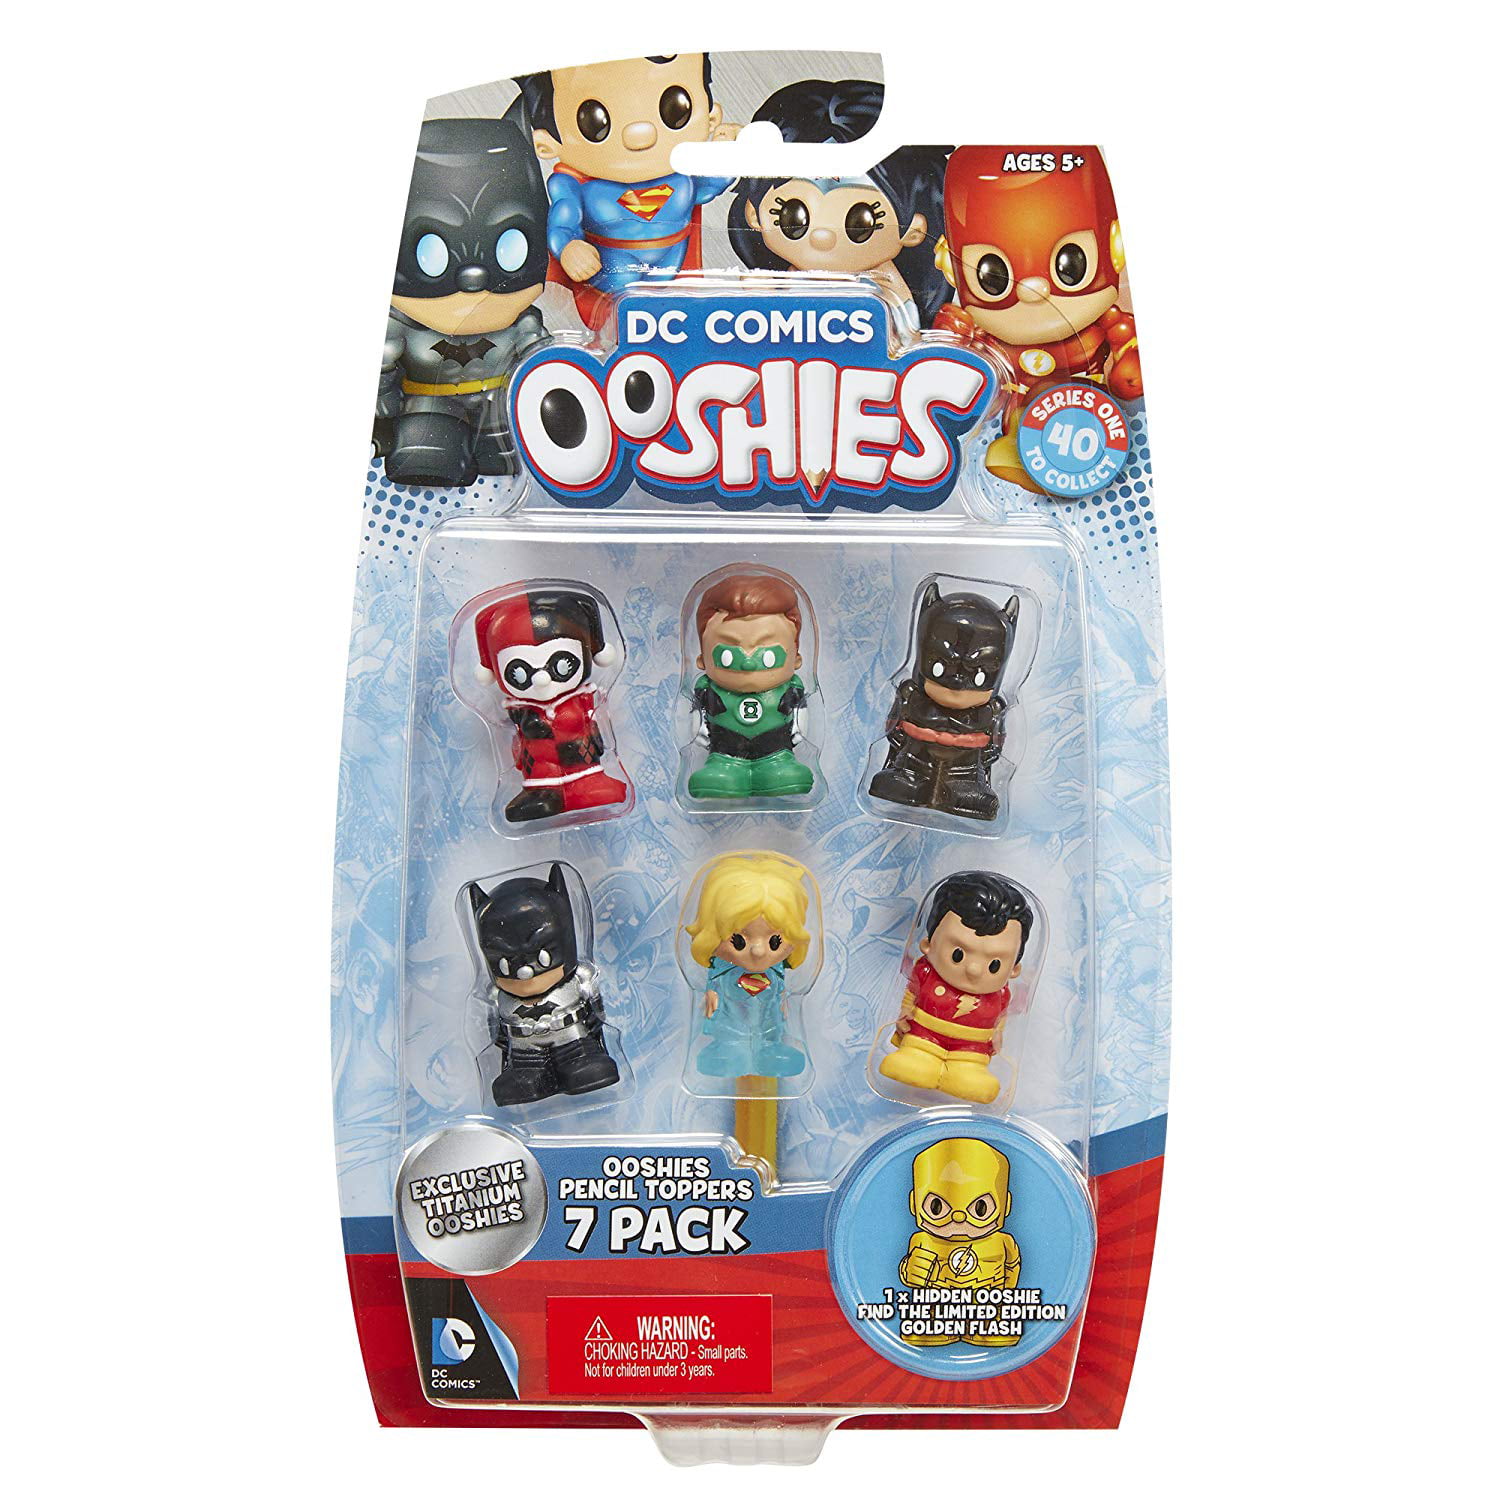 WWE OOSHIES SERIES 1 WRESTLING FIGURE PENCIL TOPPERS 5 x BLIND BAGS 